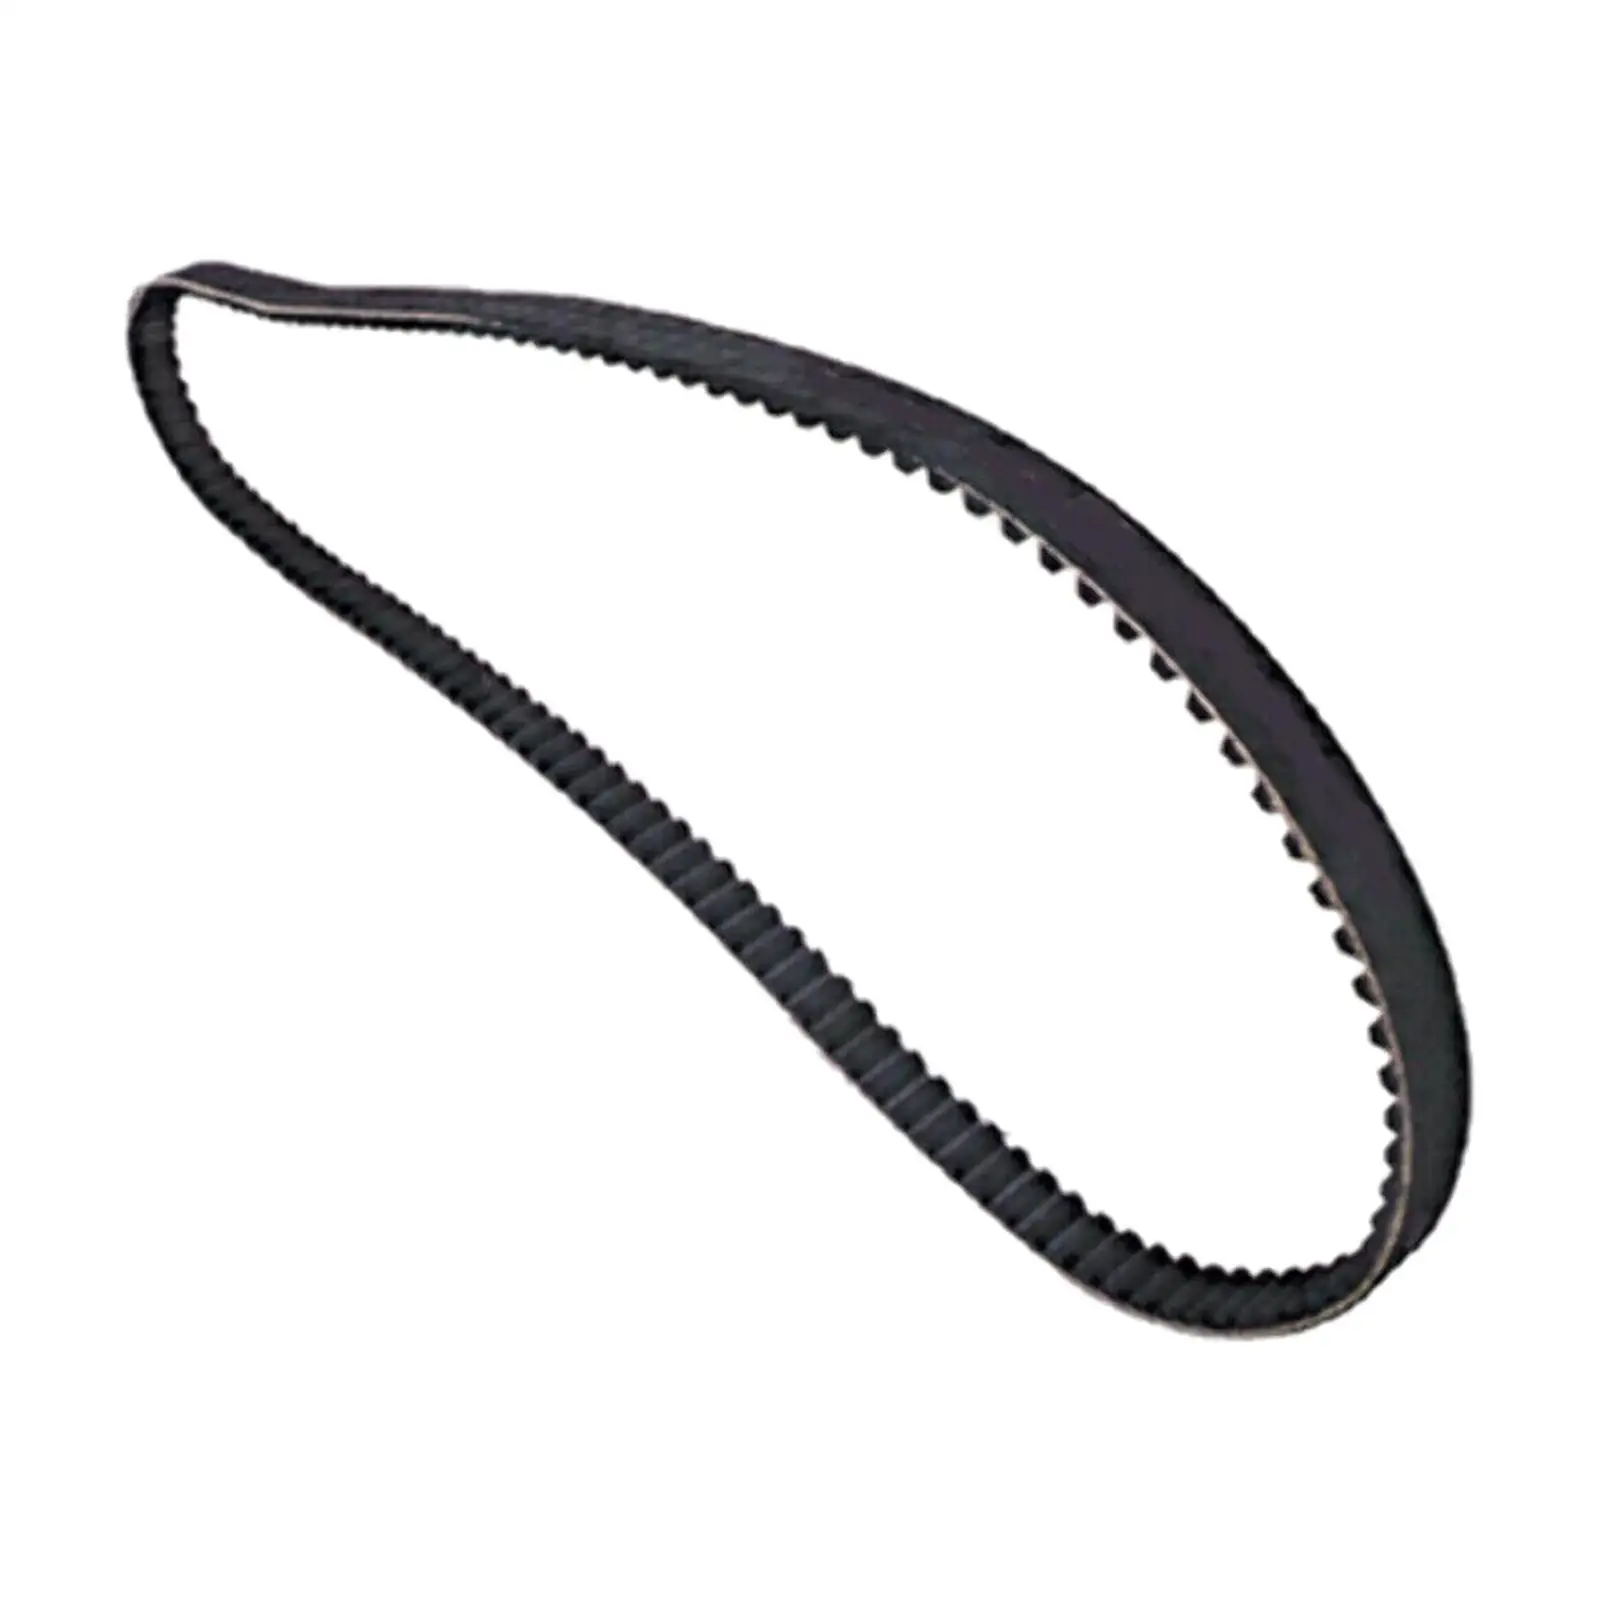 Rear Drive Belt 1204-0051 Motorcycle Accessories Rubber 58-433 133 Tooth 1 1/8